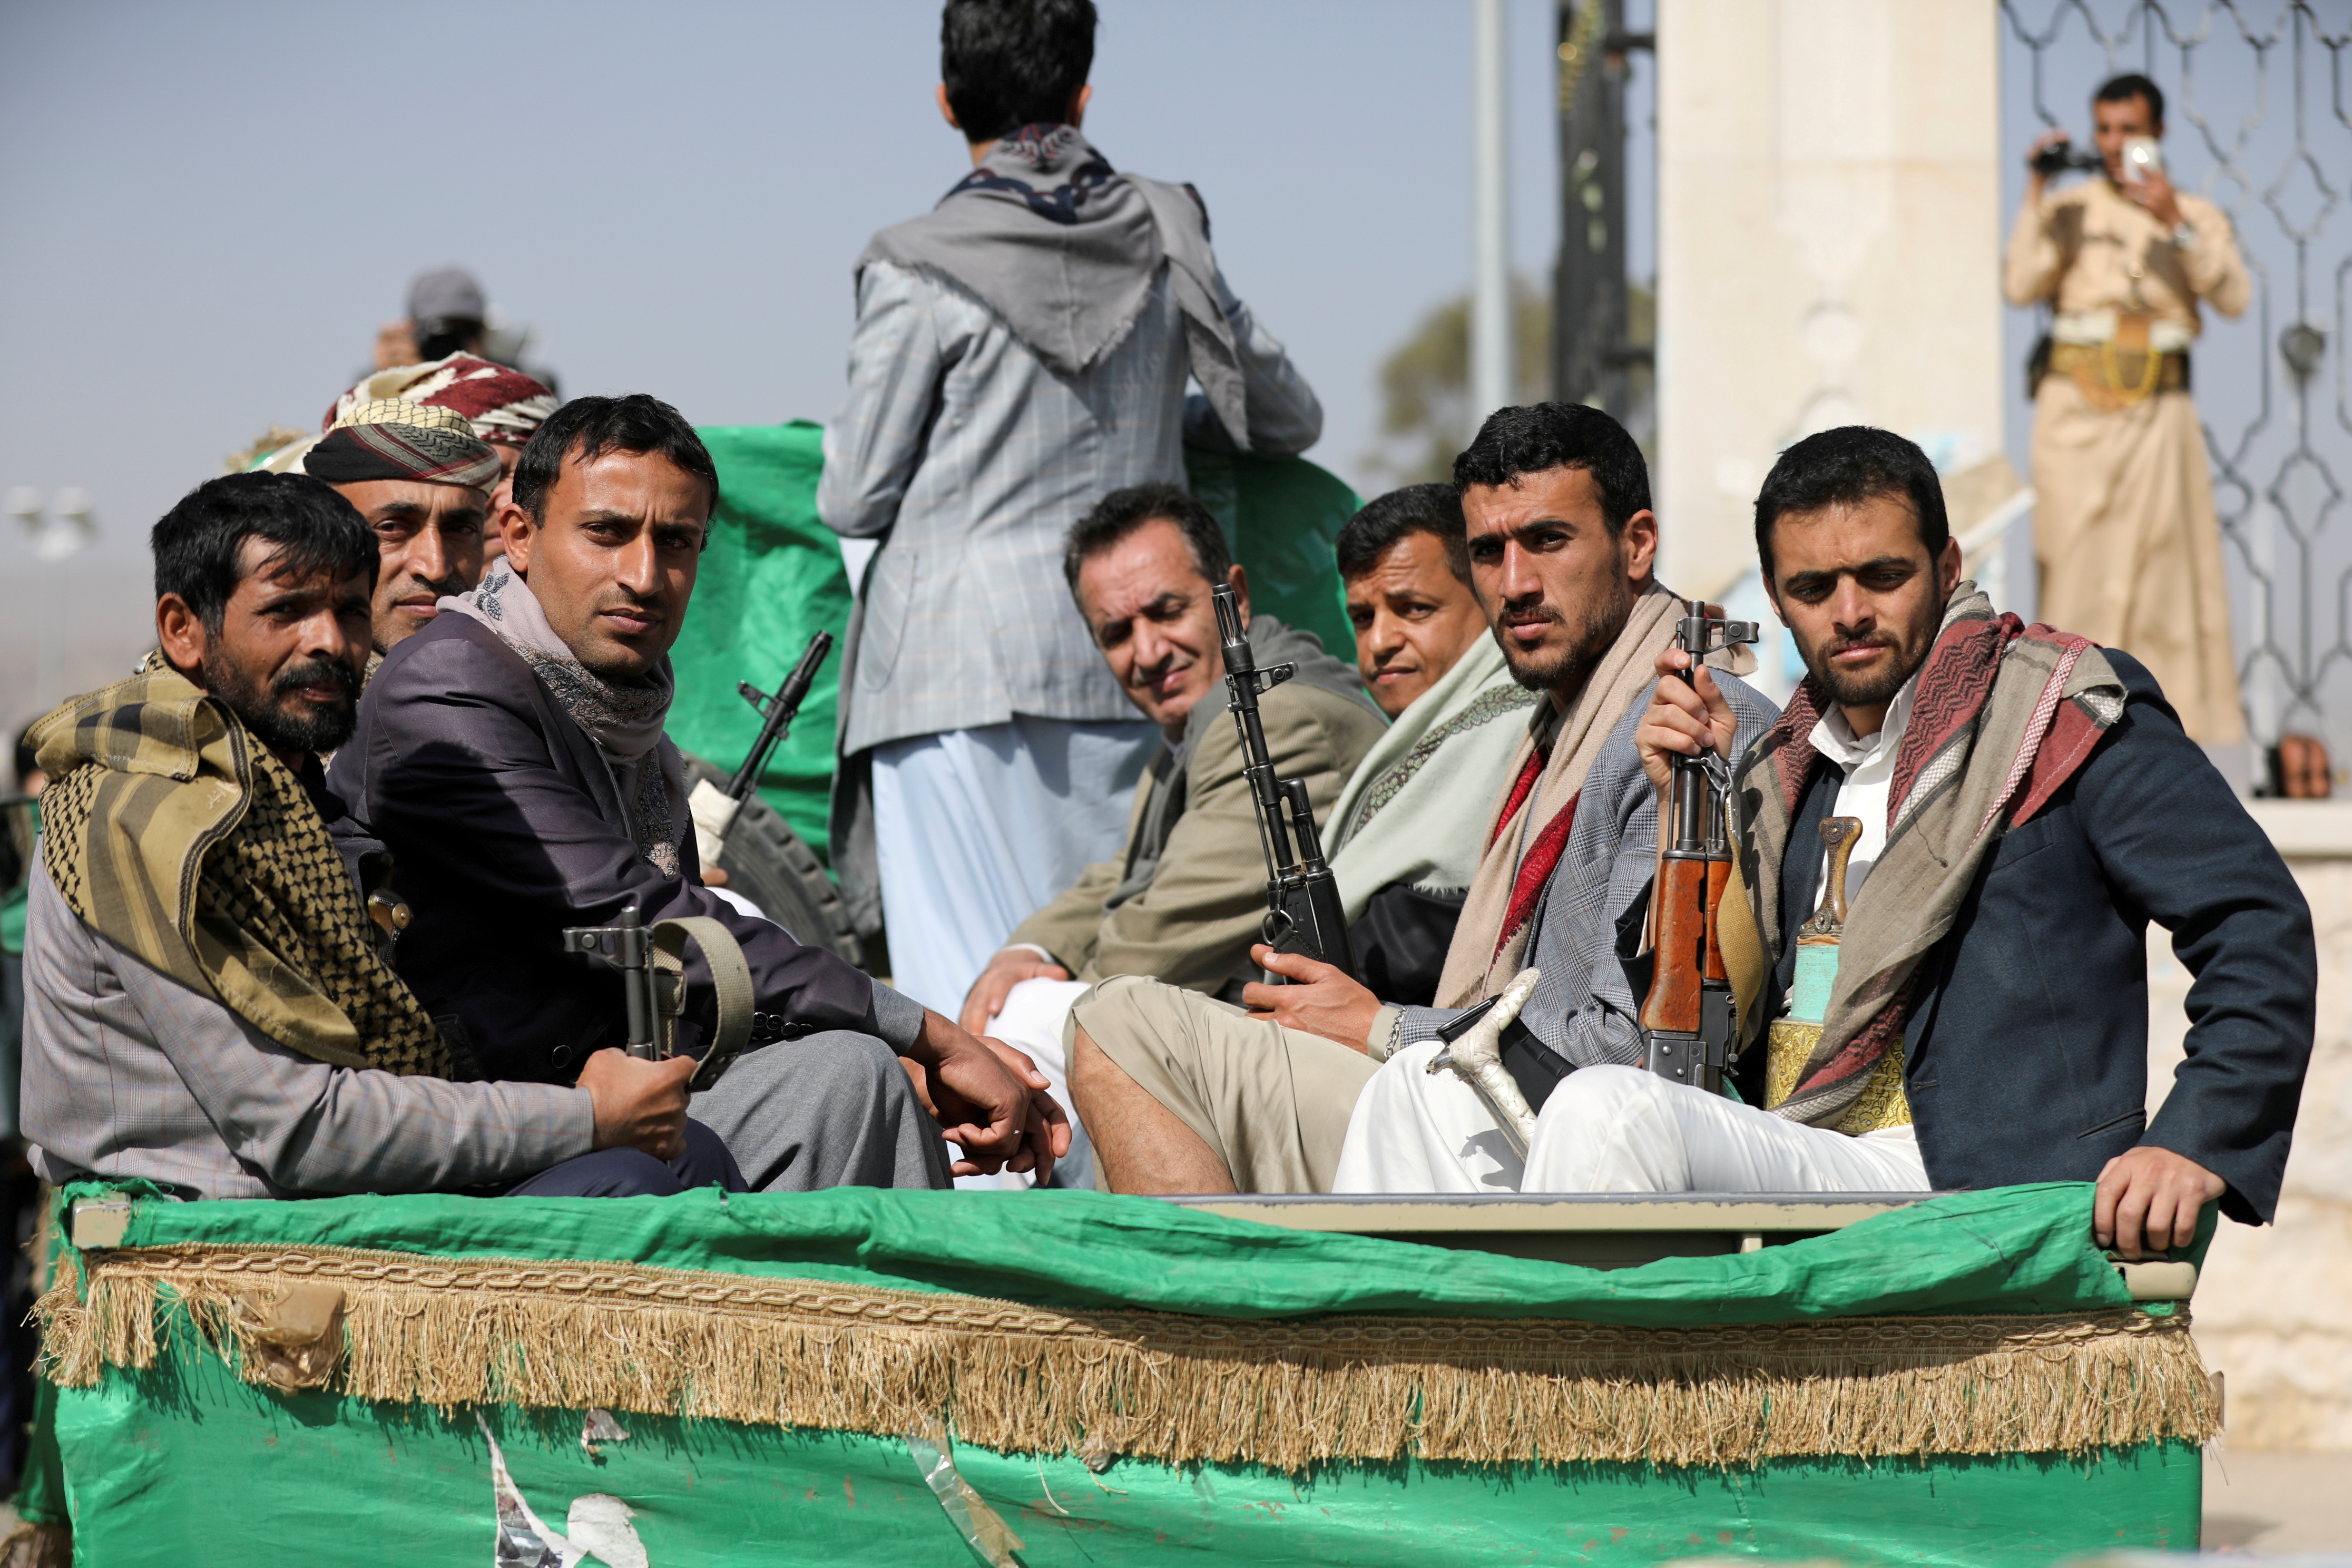 Armed Houthi followers ride on the back of a truck after participating in a funeral of Houthi fighters killed in recent fighting against government forces in Yemen's oil-rich province of Marib, in Sanaa, Yemen